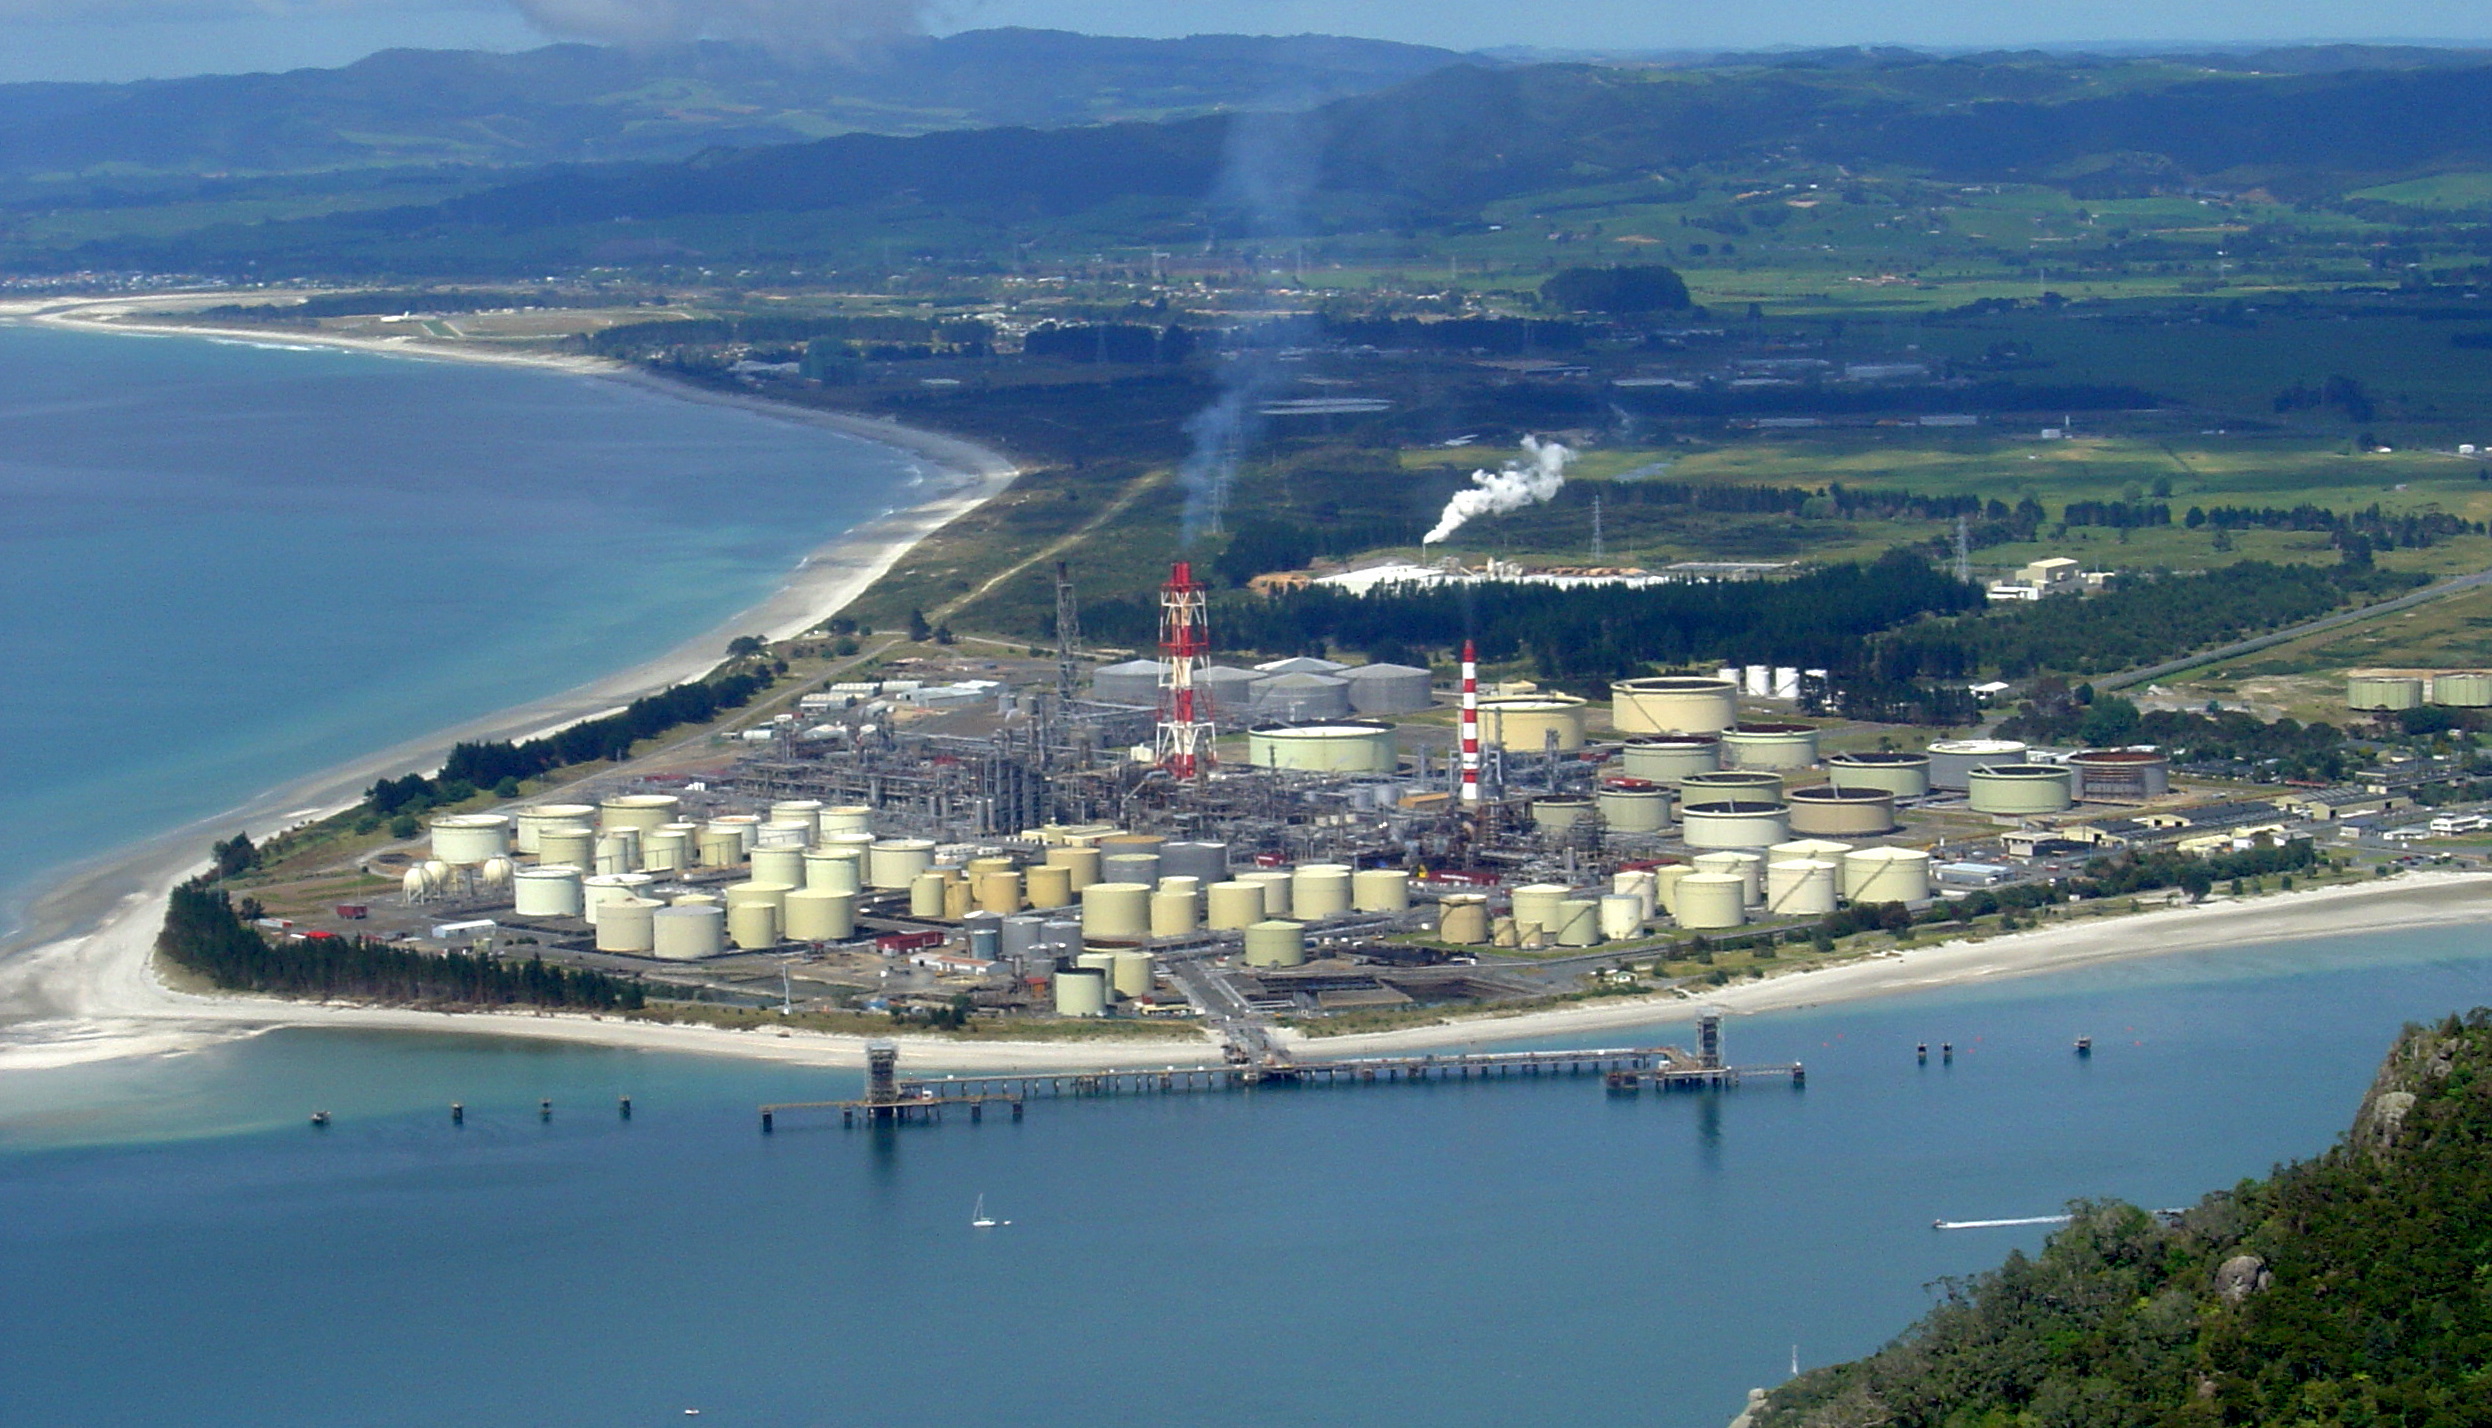 As NZ oil refining ends, govt weighs strategic implications